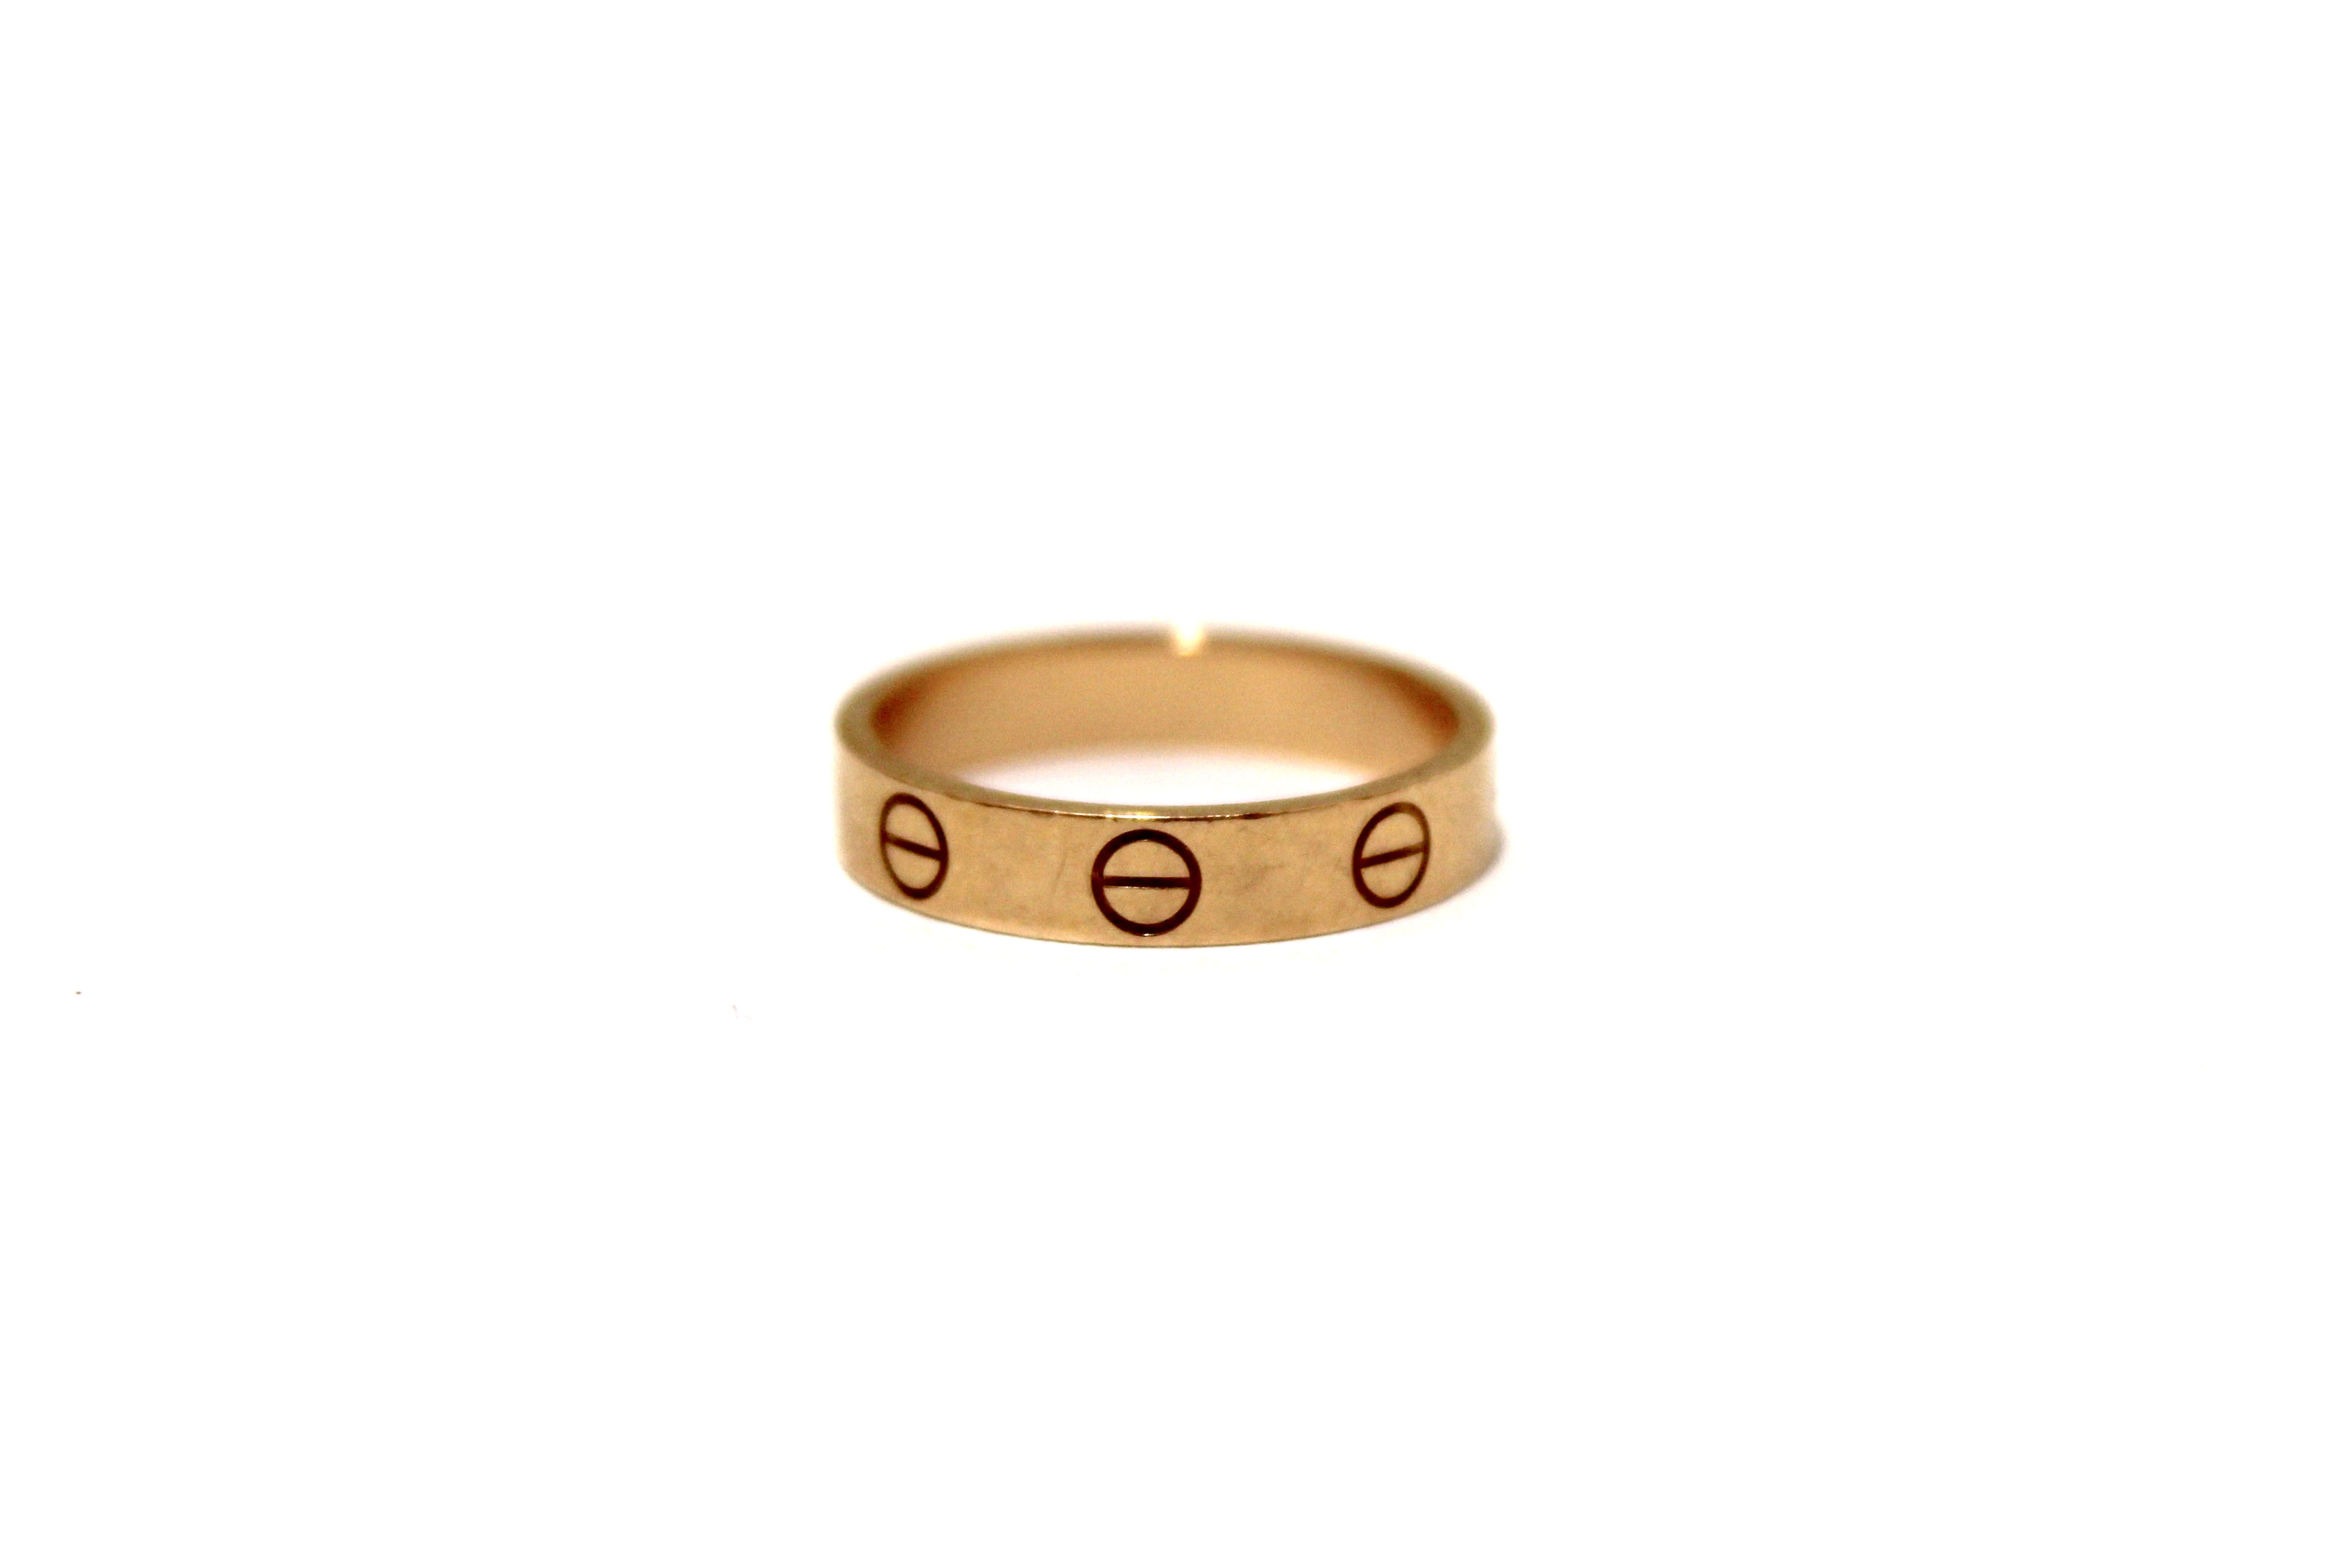 Authentic Cartier 18K Rose Gold Love Wedding Band Ring Size 5